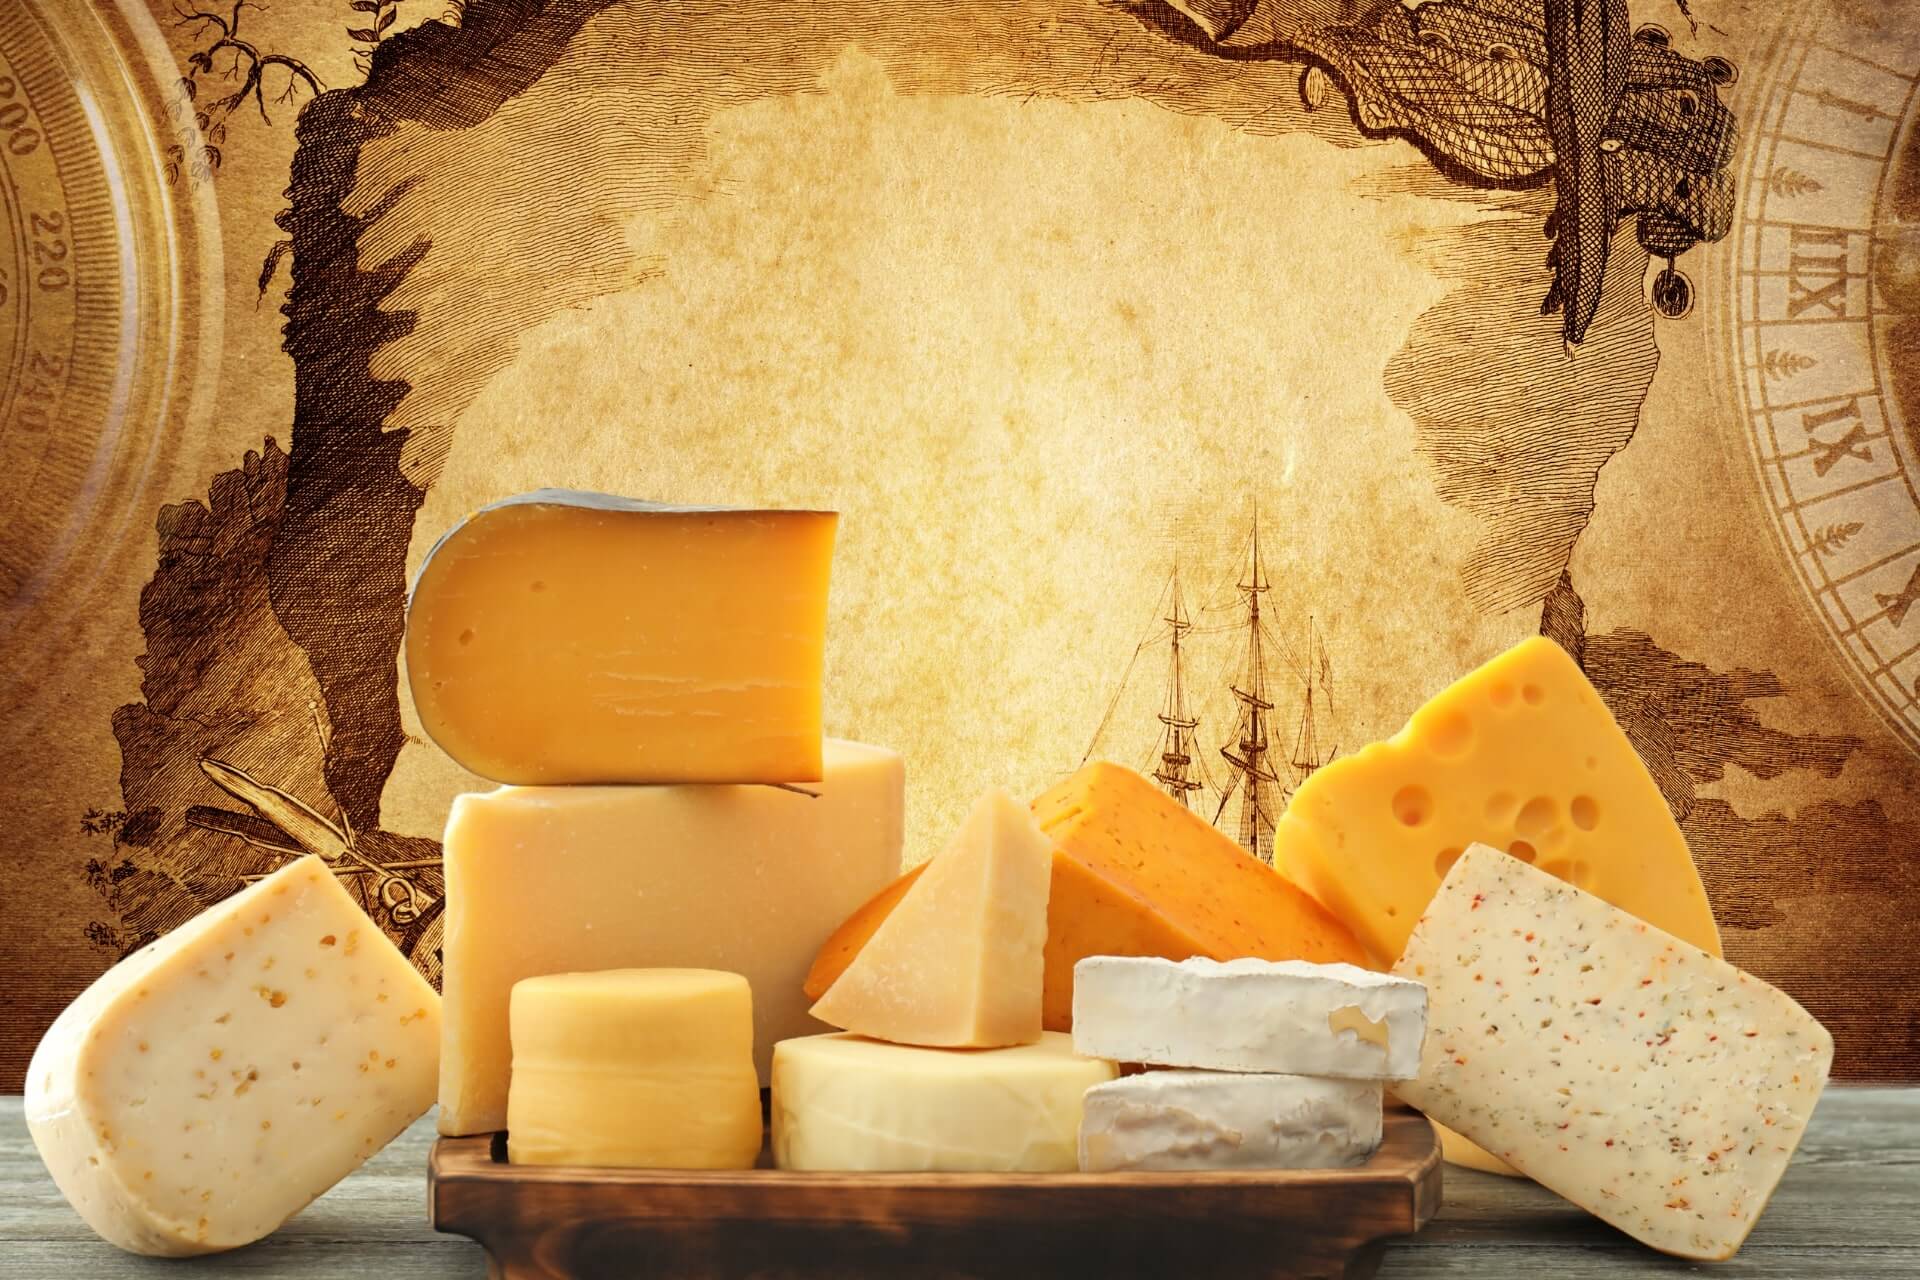 history of cheese